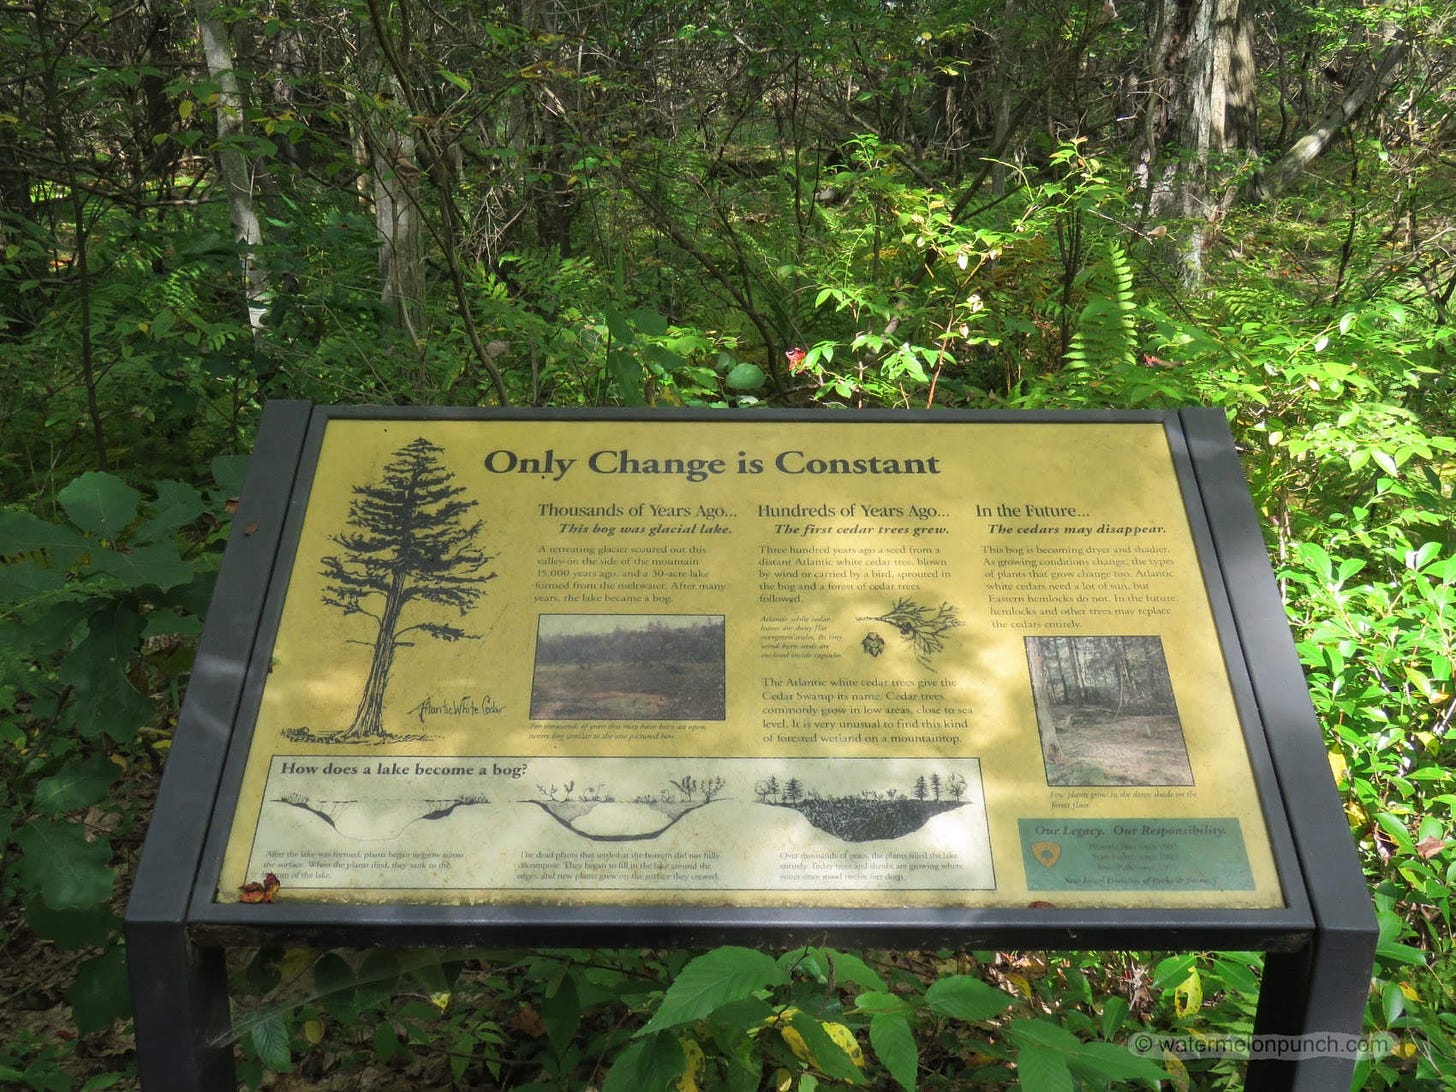 Photo of a trail information interpretive sign with the heading stating “Only Change is Constant” surrounded by green bushes, trees, and ferns.